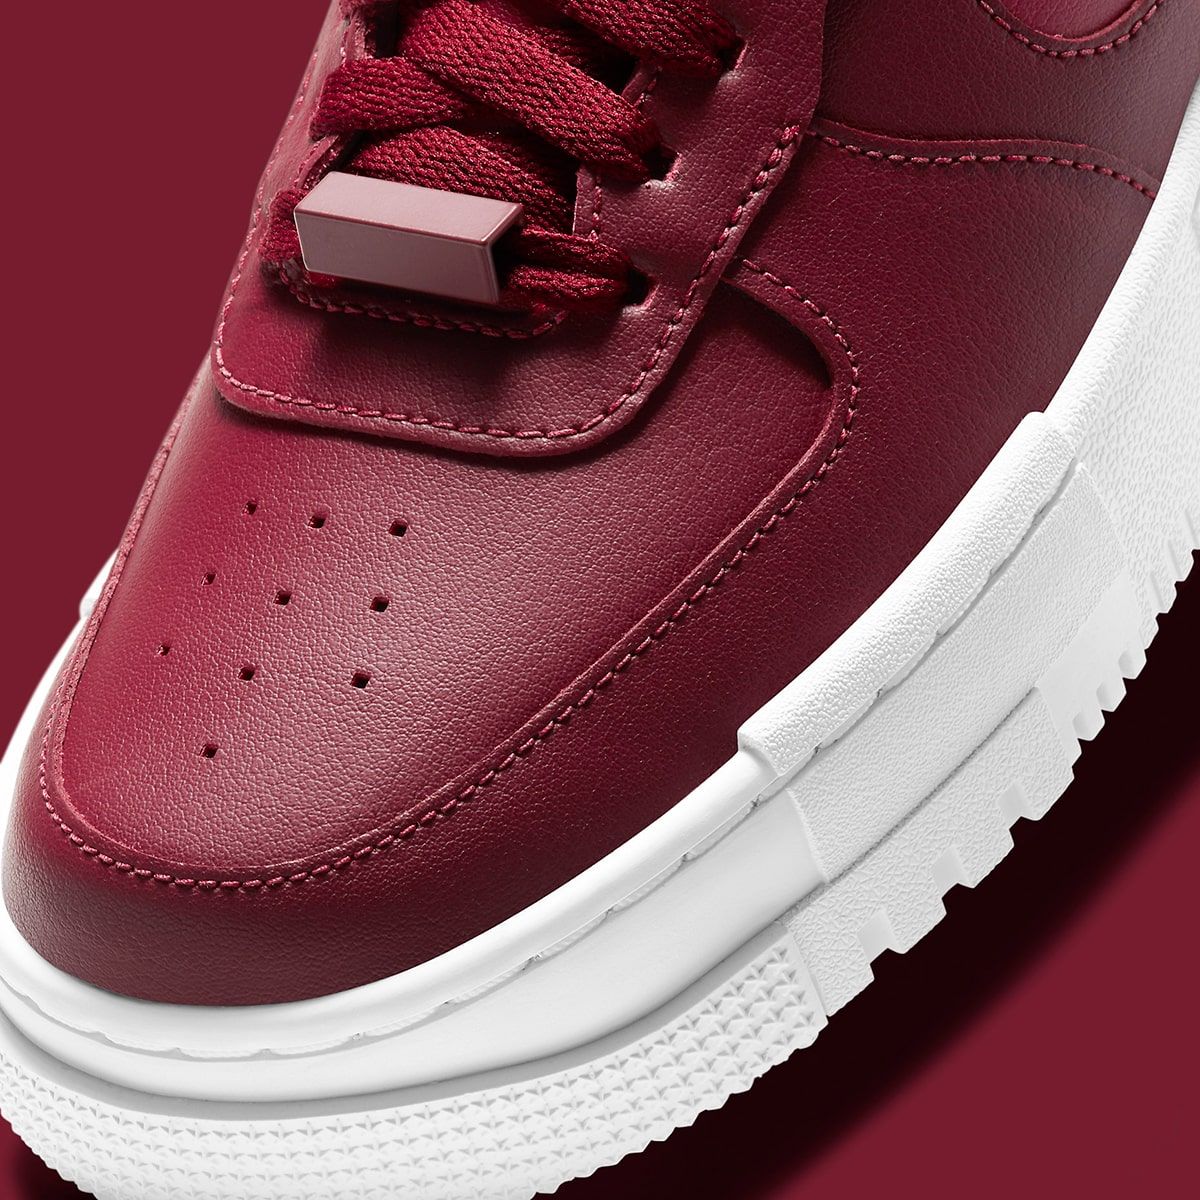 Nike Air Force 1 Low Pixel “Team Red” Set to Arrive Before Year's